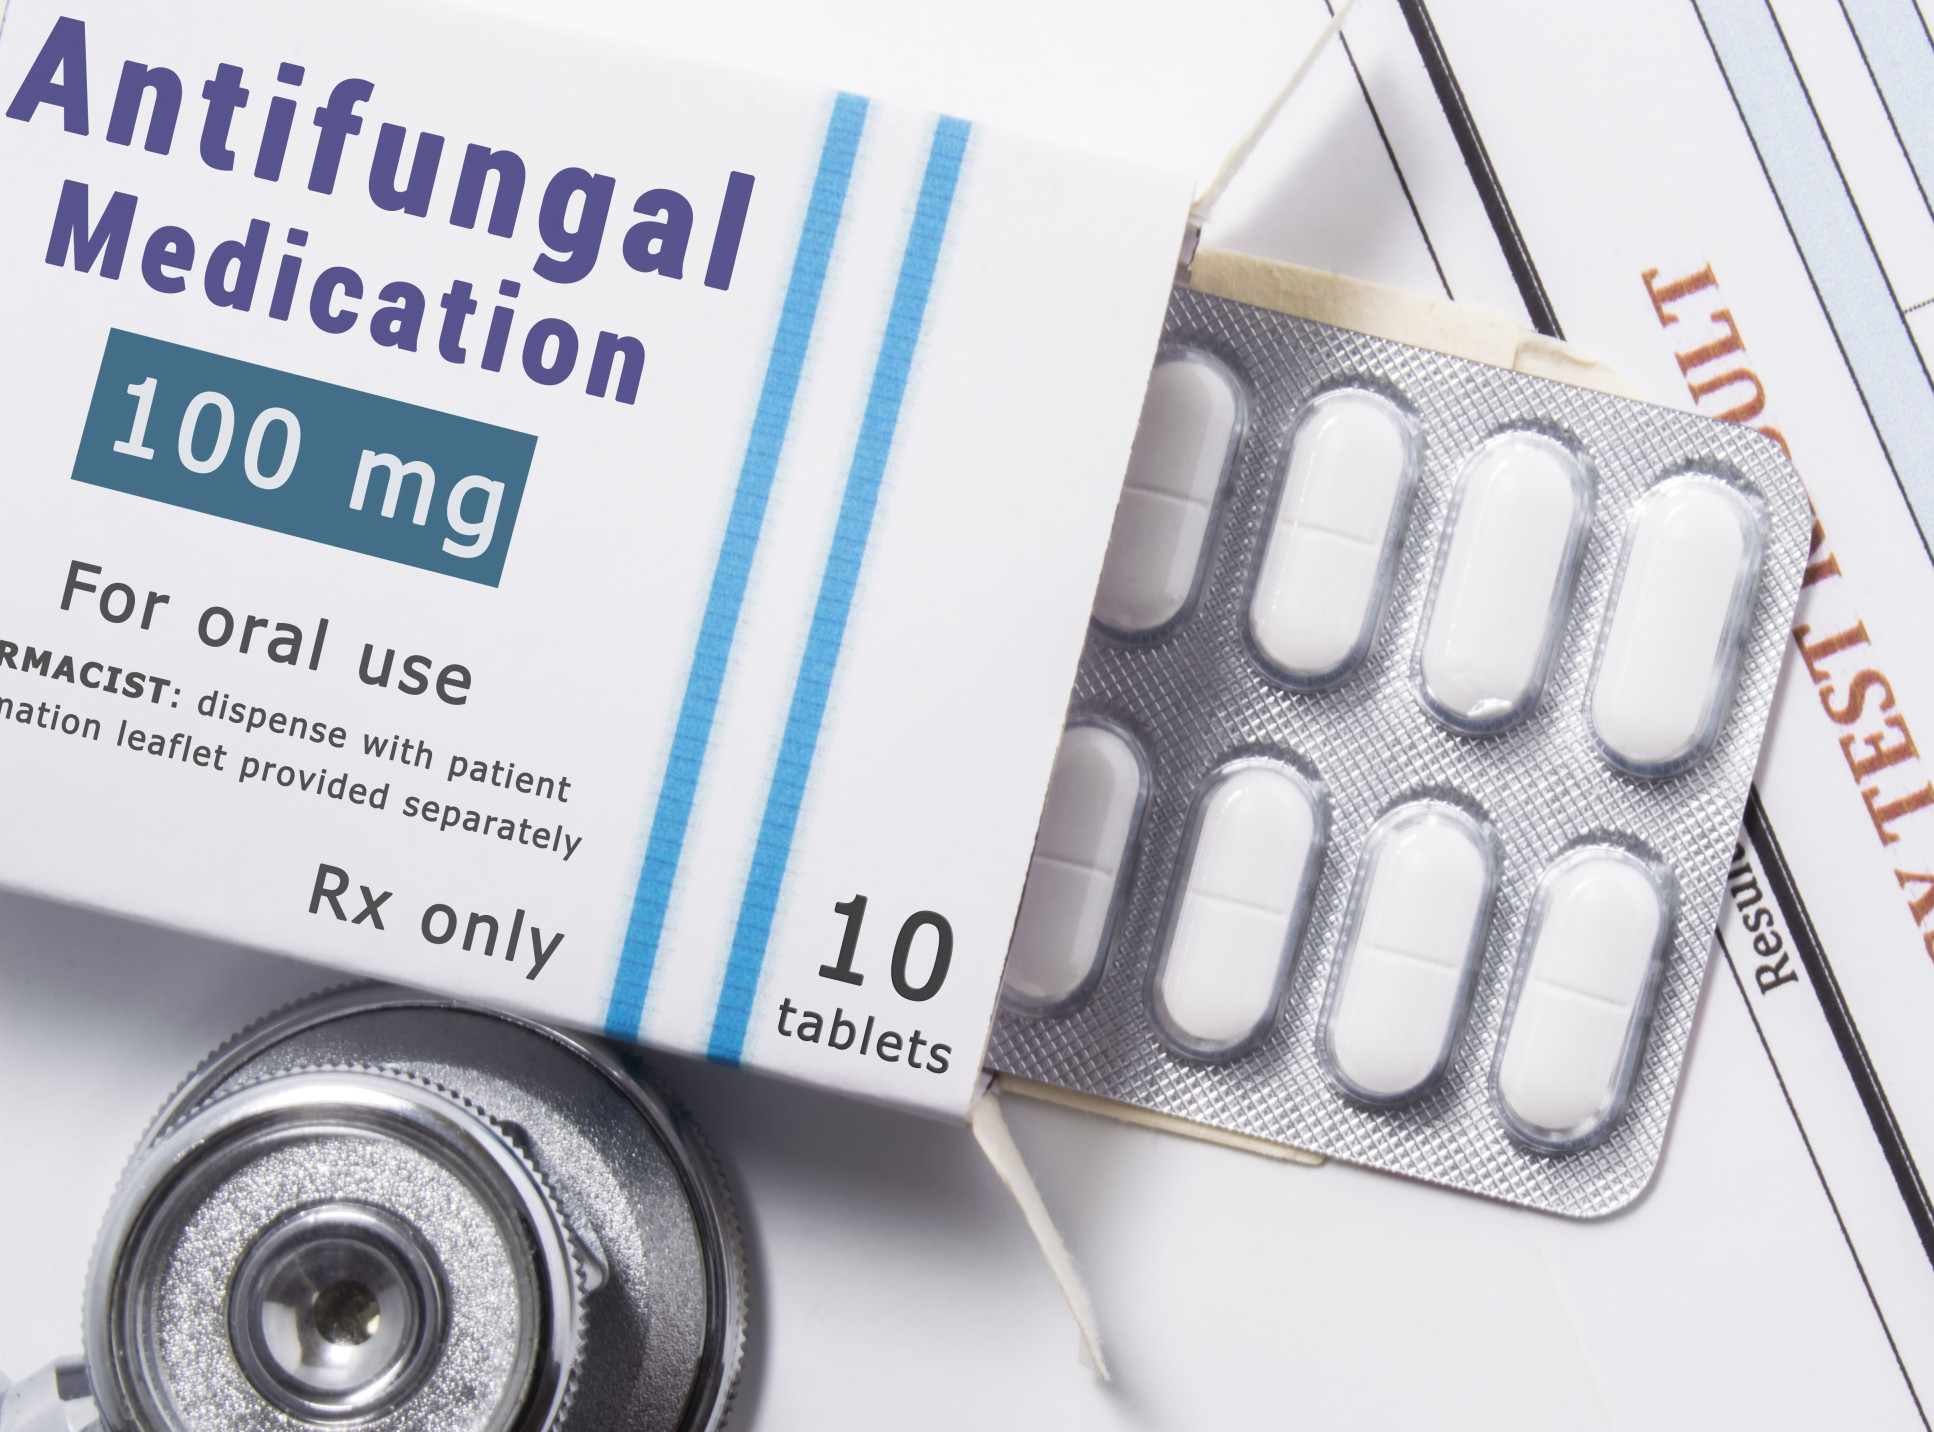 An image of a packet of antifugal medication